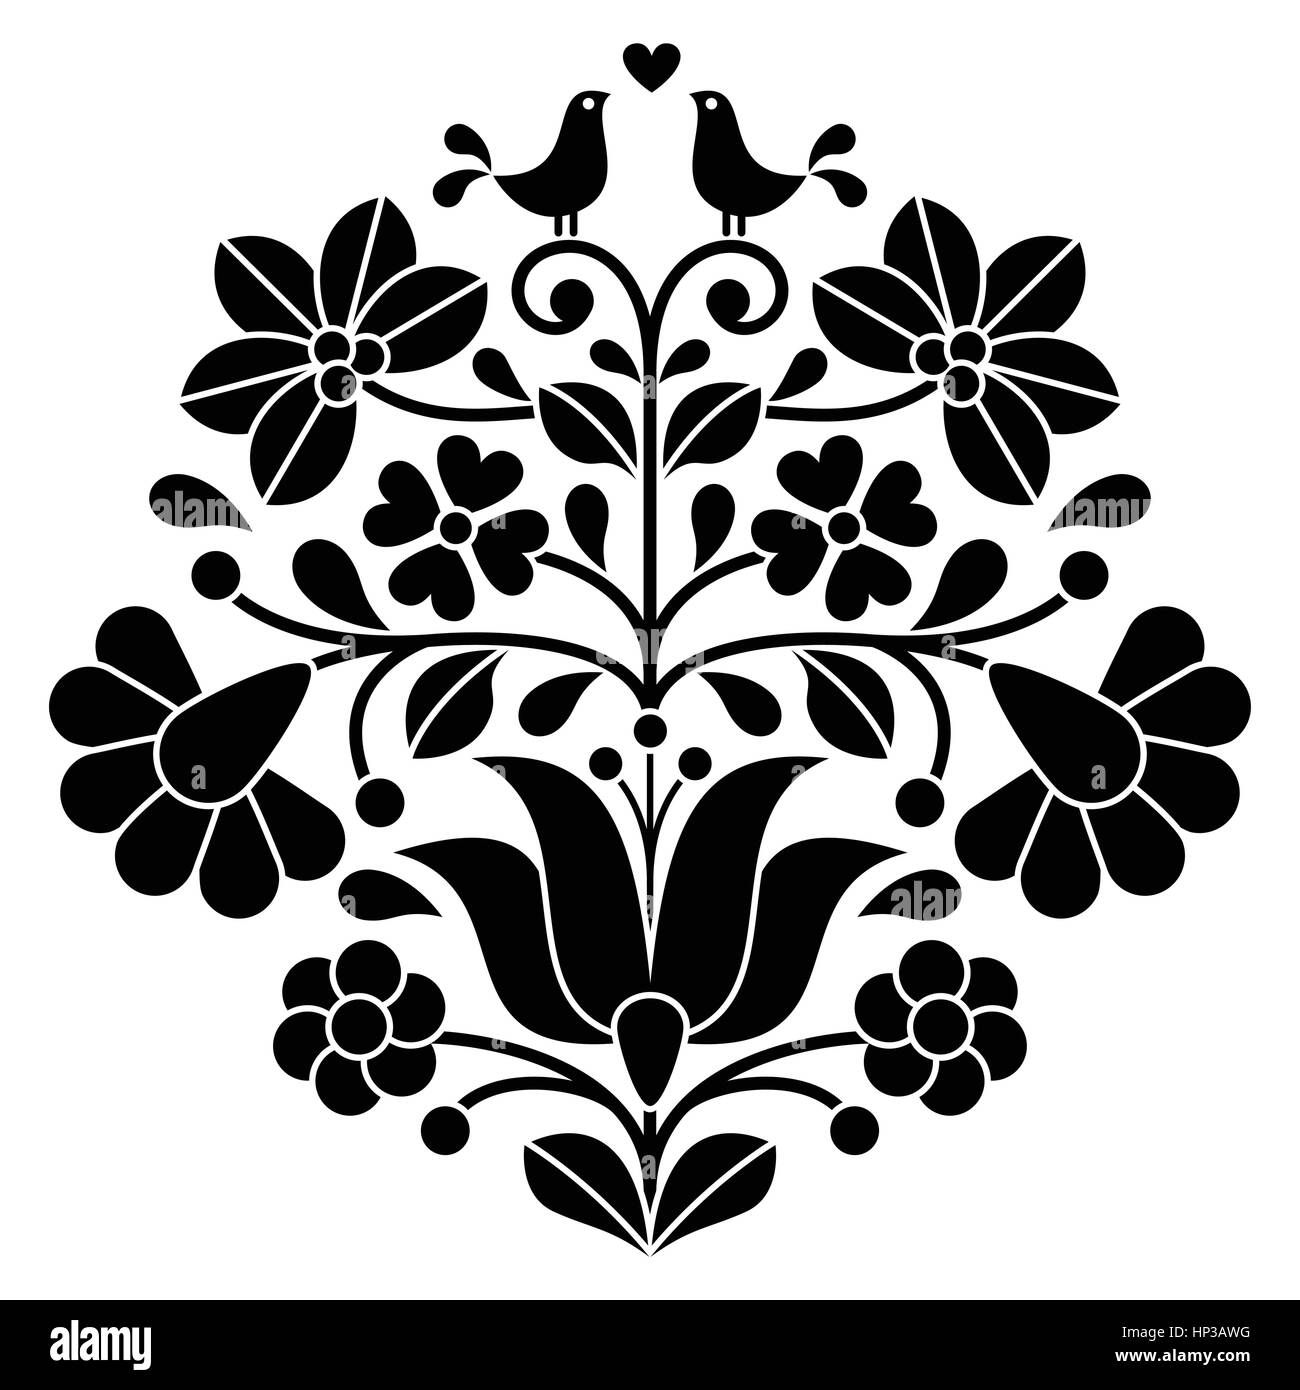 Kalocsai black embroidery - Hungarian floral folk pattern with birds Stock Vector